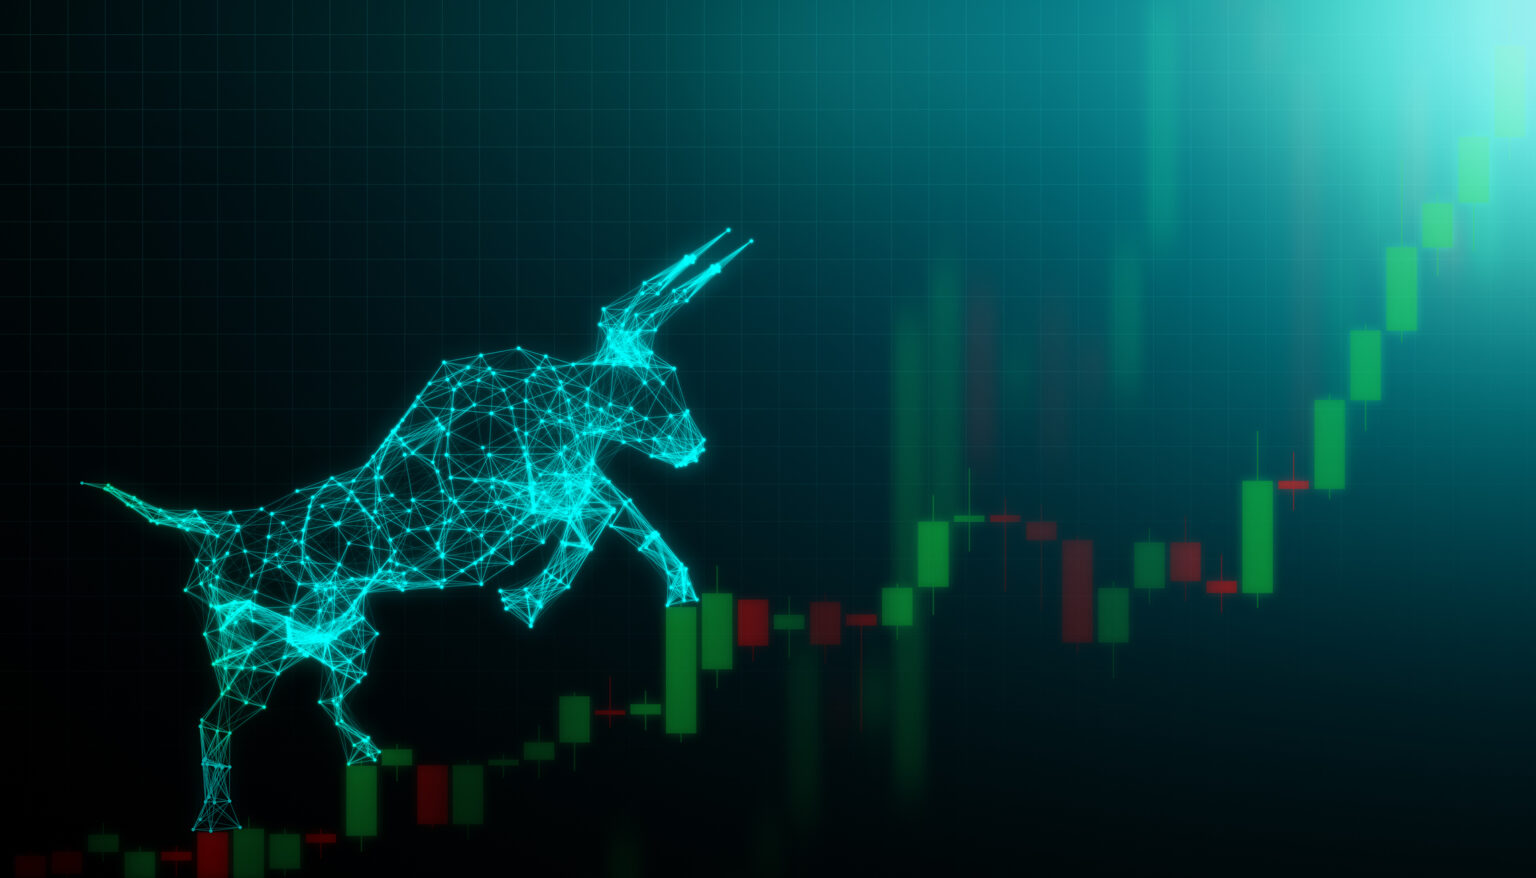 Dogecoin Rally Ahead? This Positive Correlation Data Points To A Potential 20% Jump For DOGE